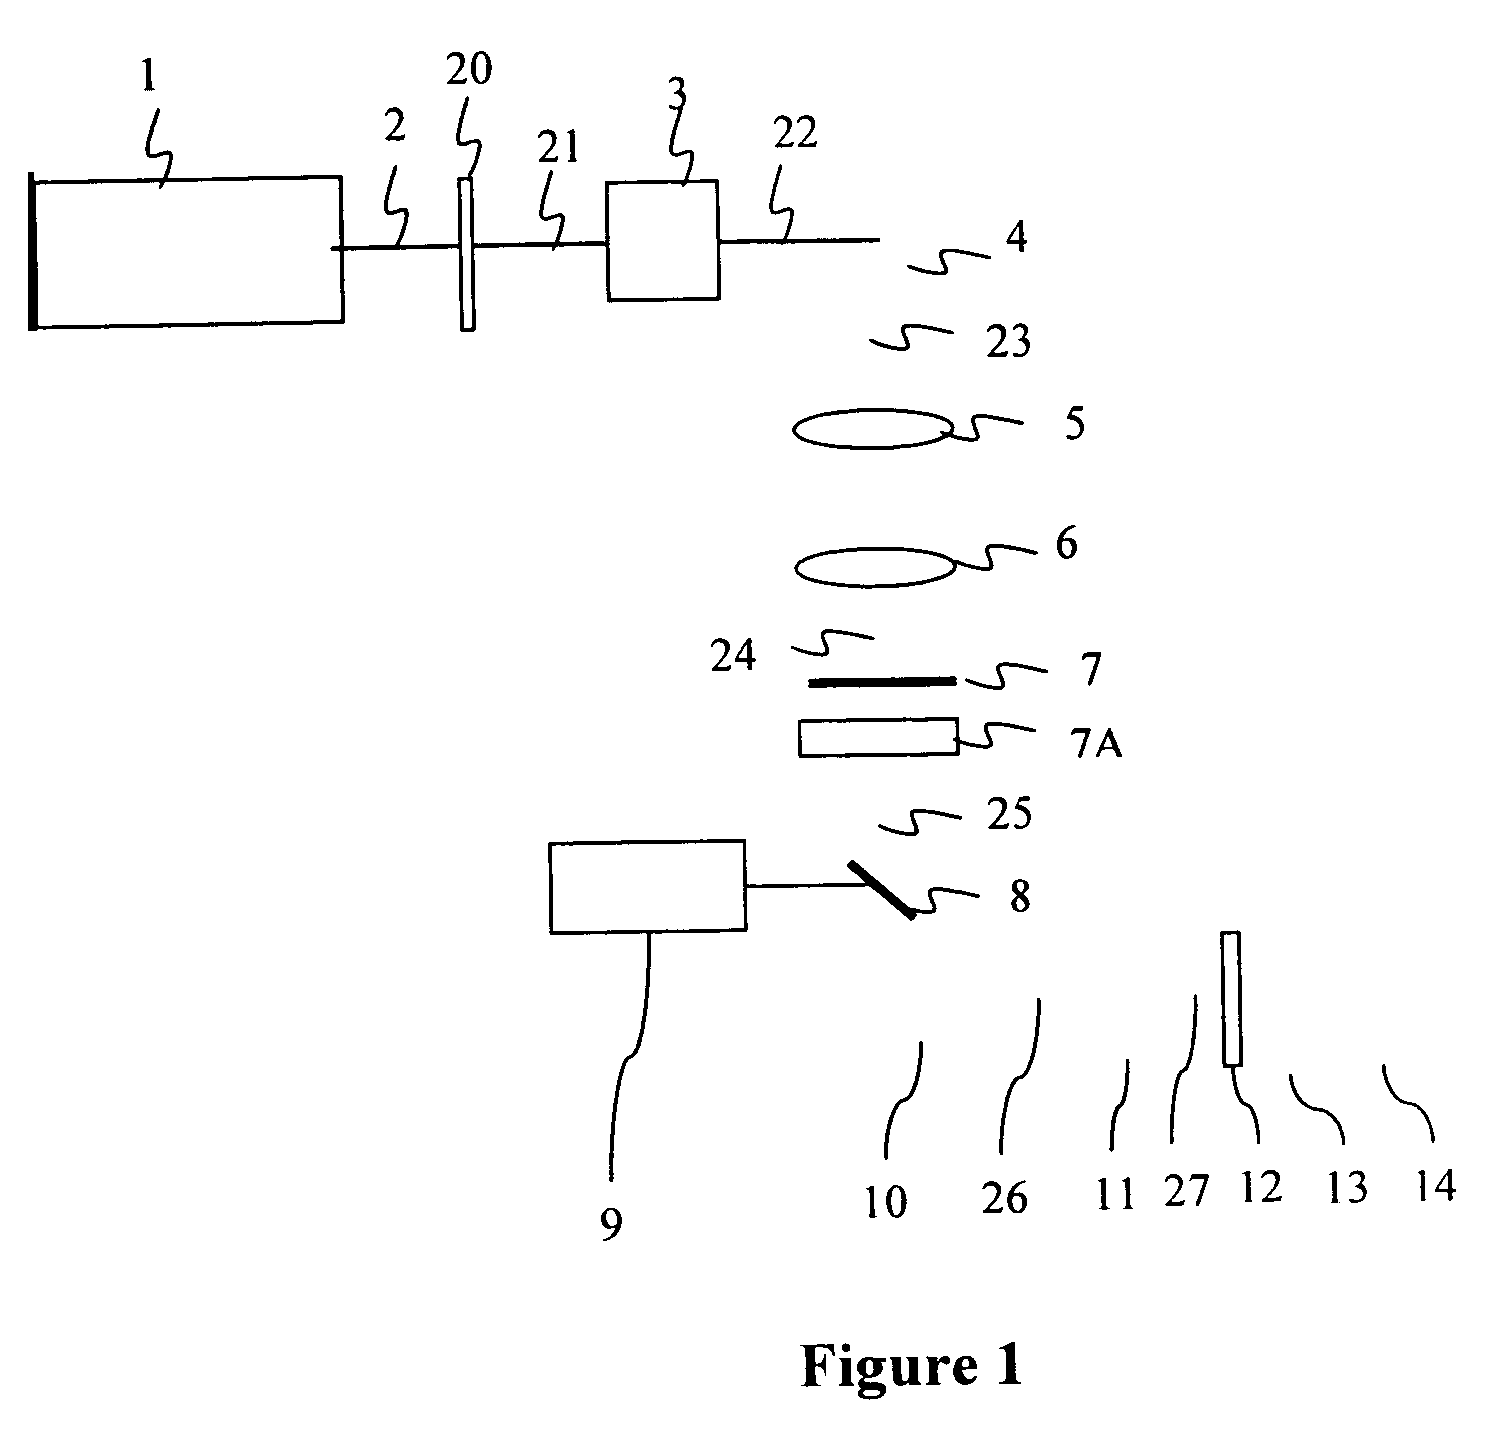 Method and apparatus for laser trimming of resistors using ultrafast laser pulse from ultrafast laser oscillator operating in picosecond and femtosecond pulse widths